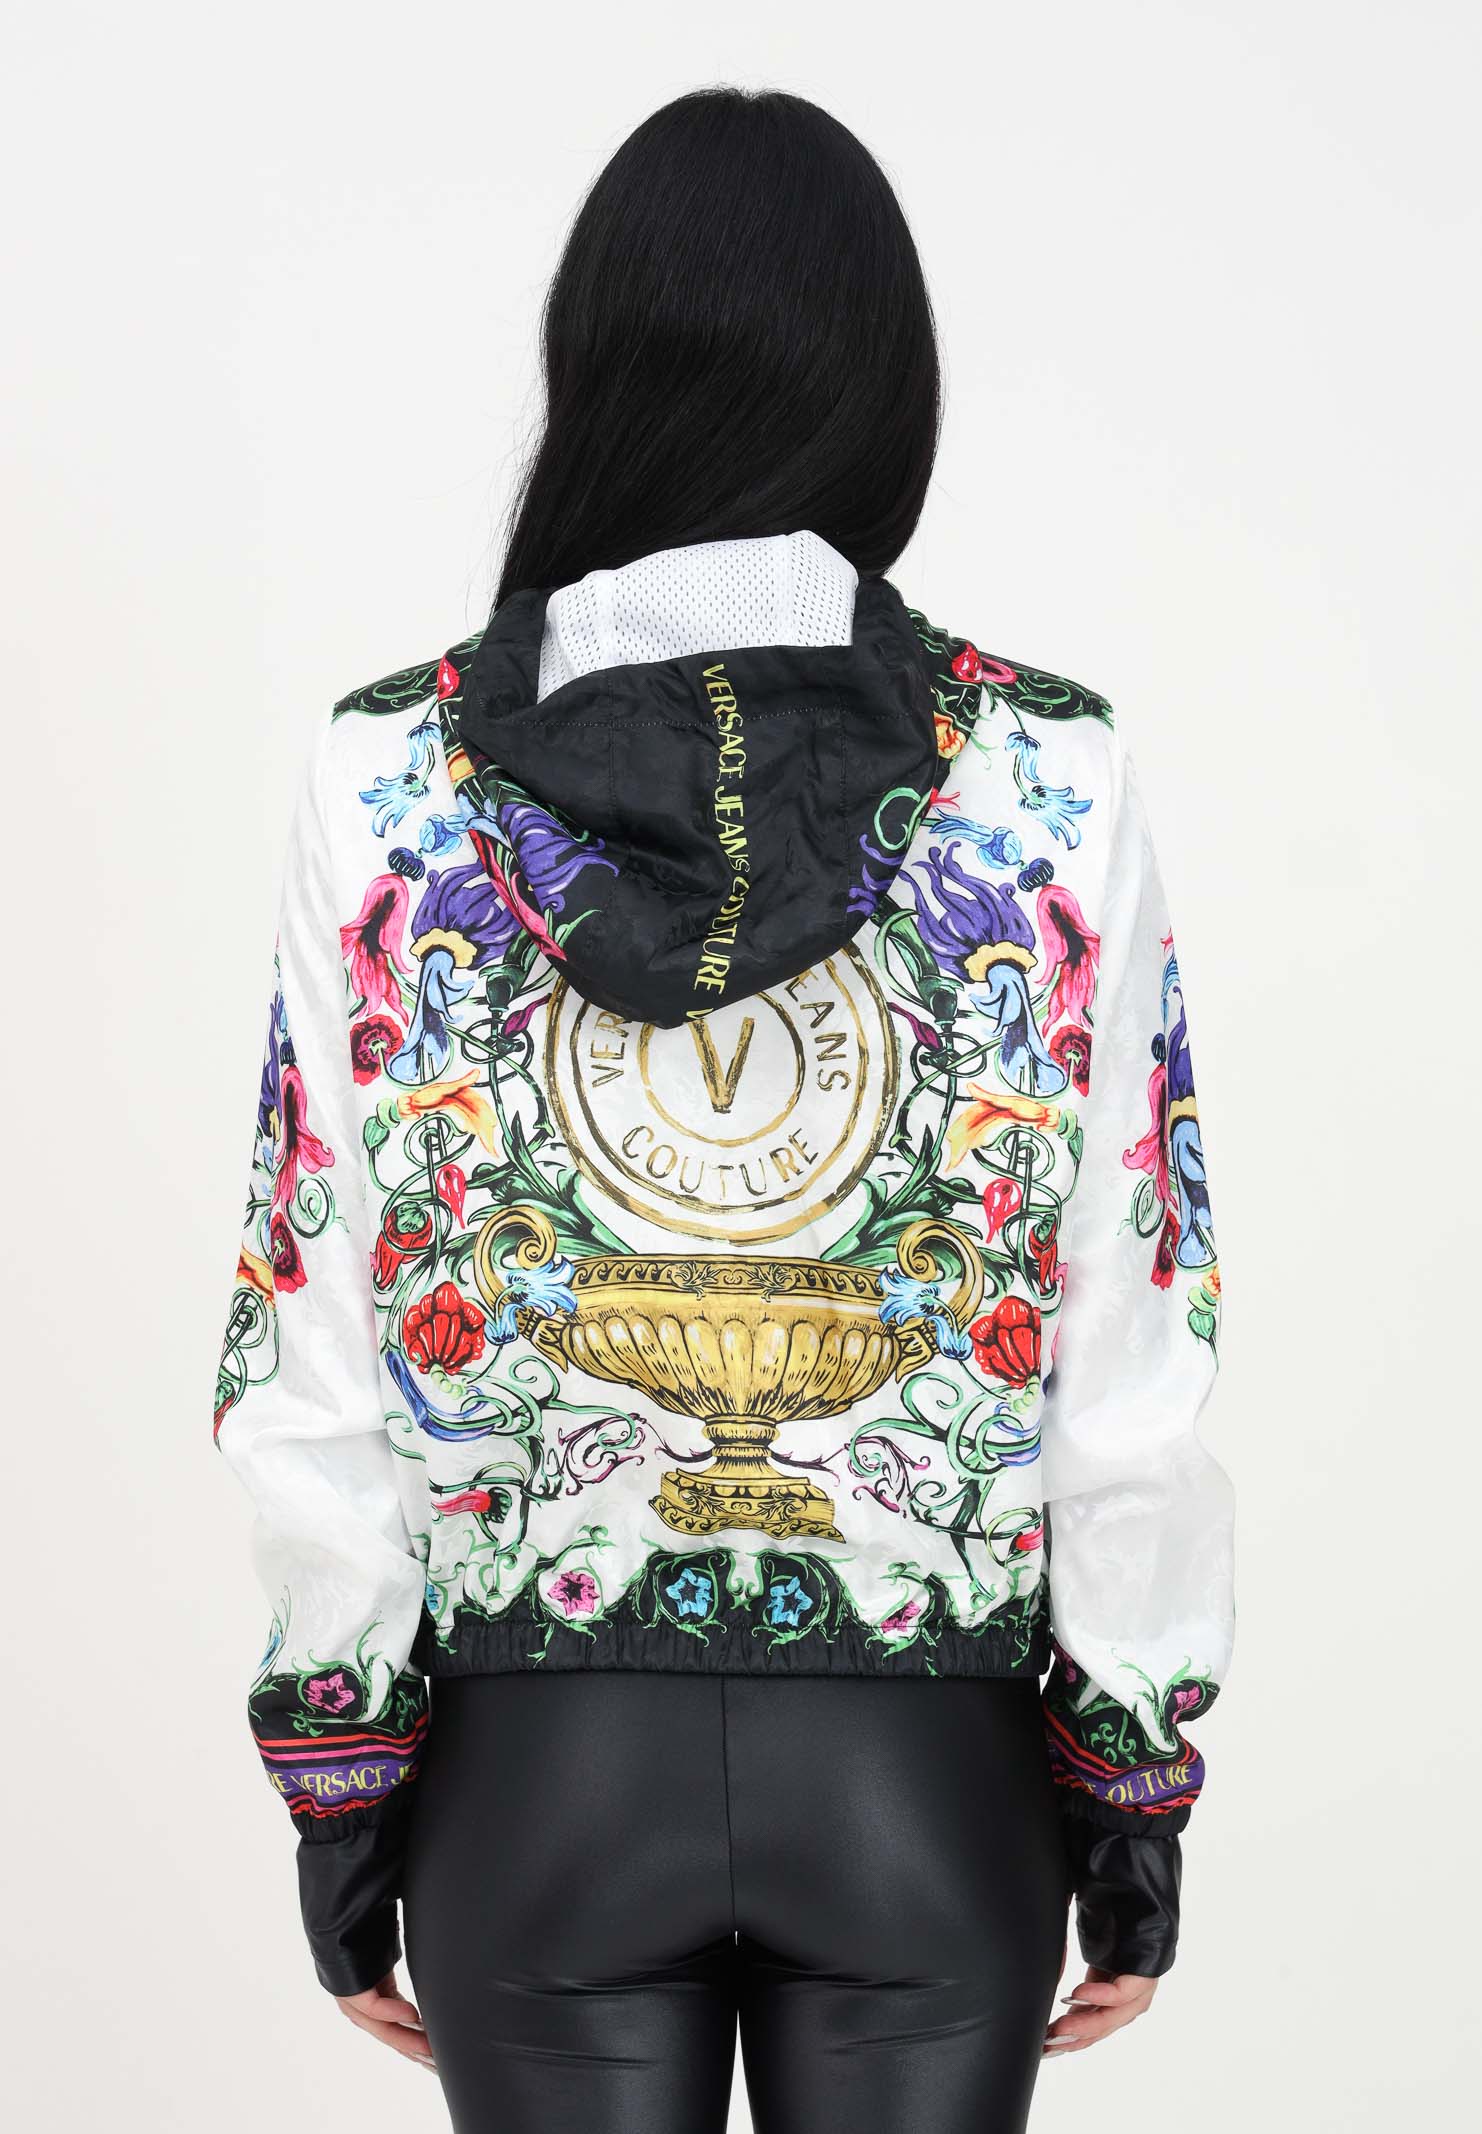 Women's white windbreaker with floral print VERSACE JEANS COUTURE | 74HAS401CQS52G03 003-948